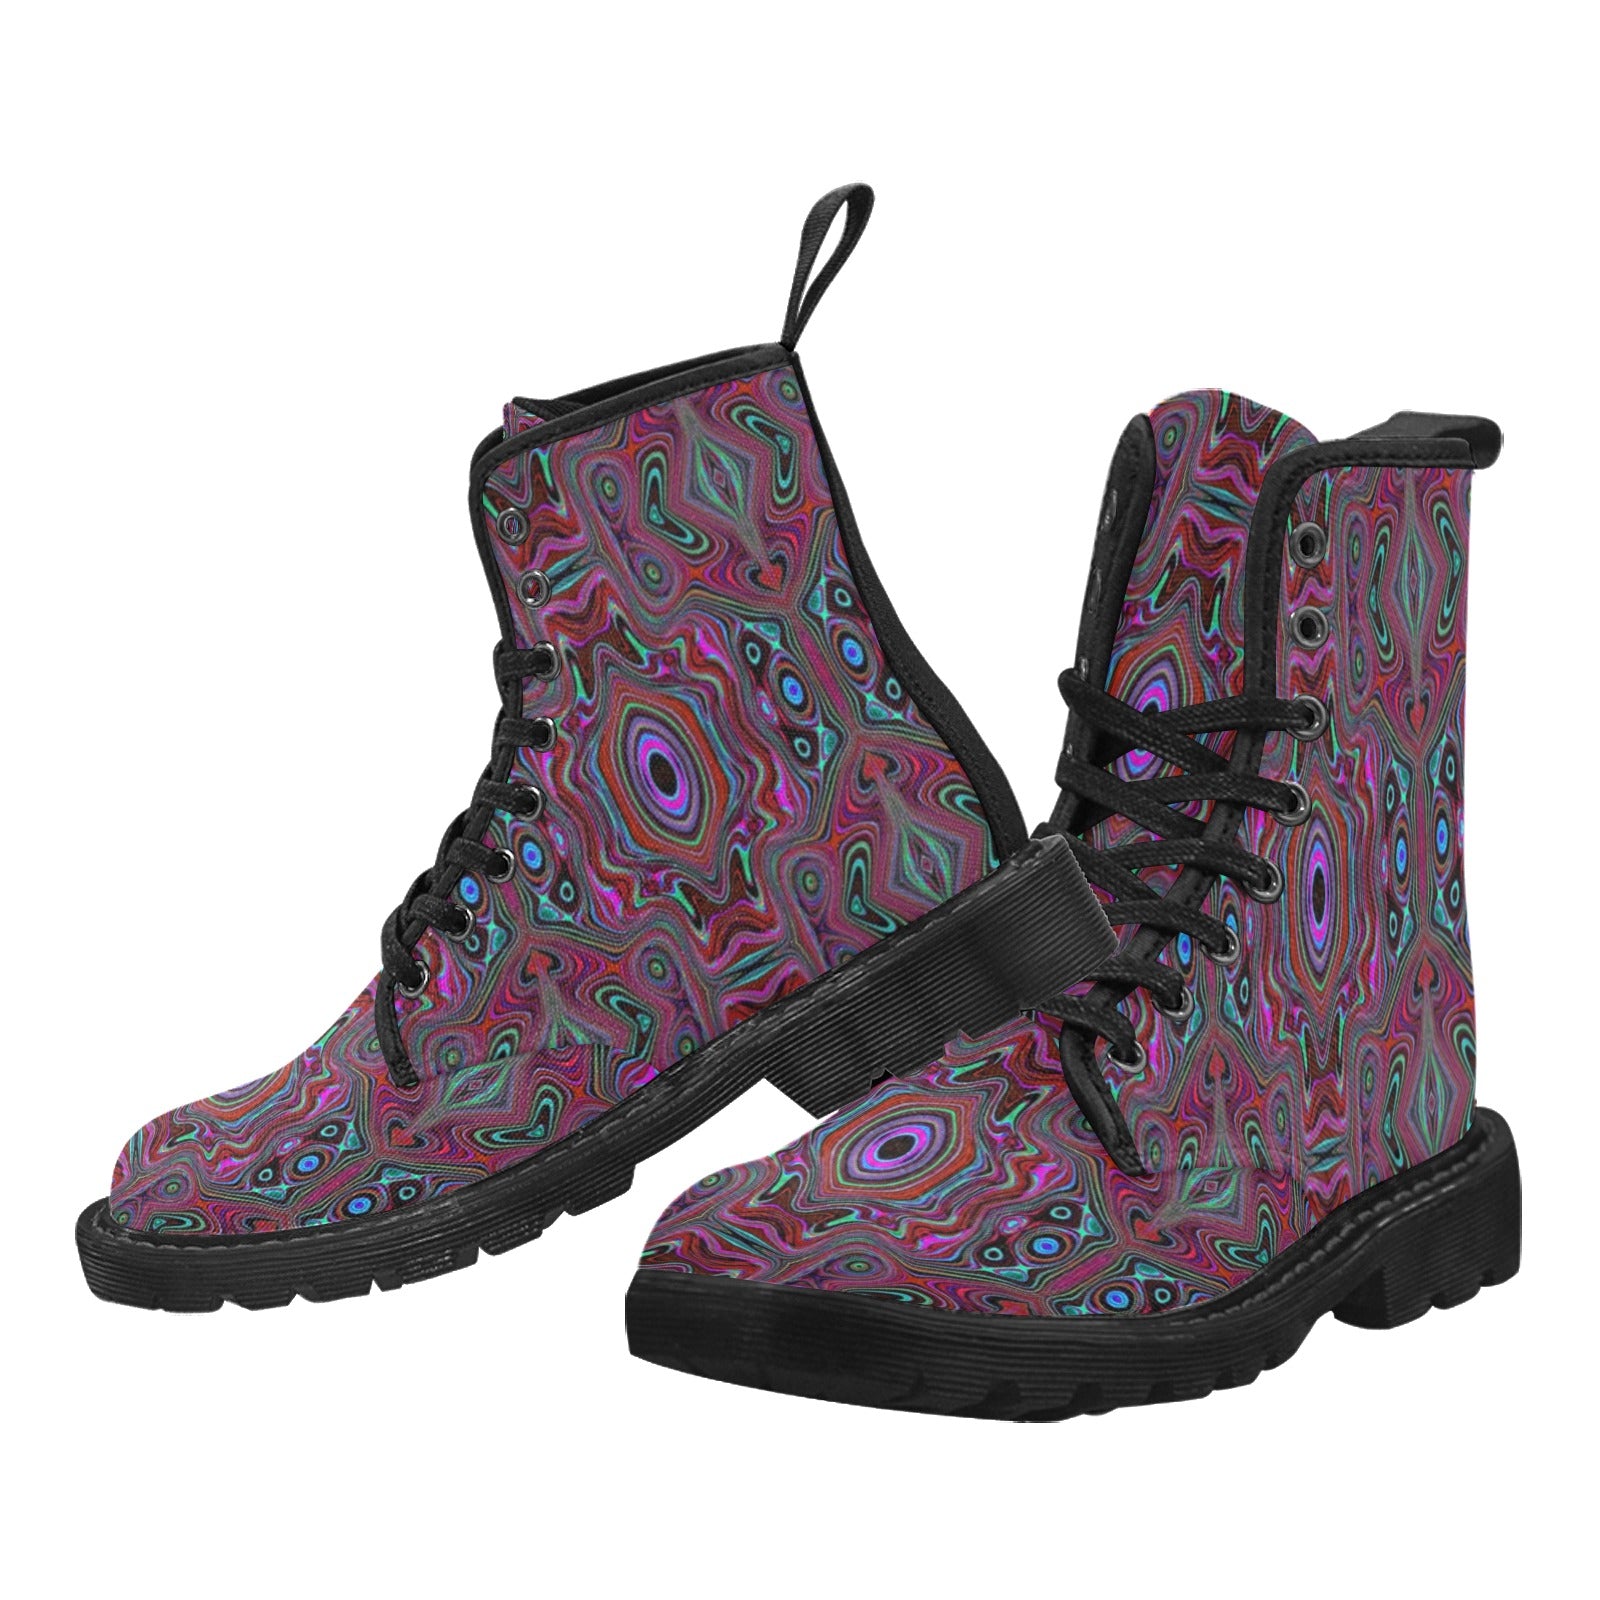 Boots for Women, Trippy Seafoam Green and Magenta Abstract Pattern - Black